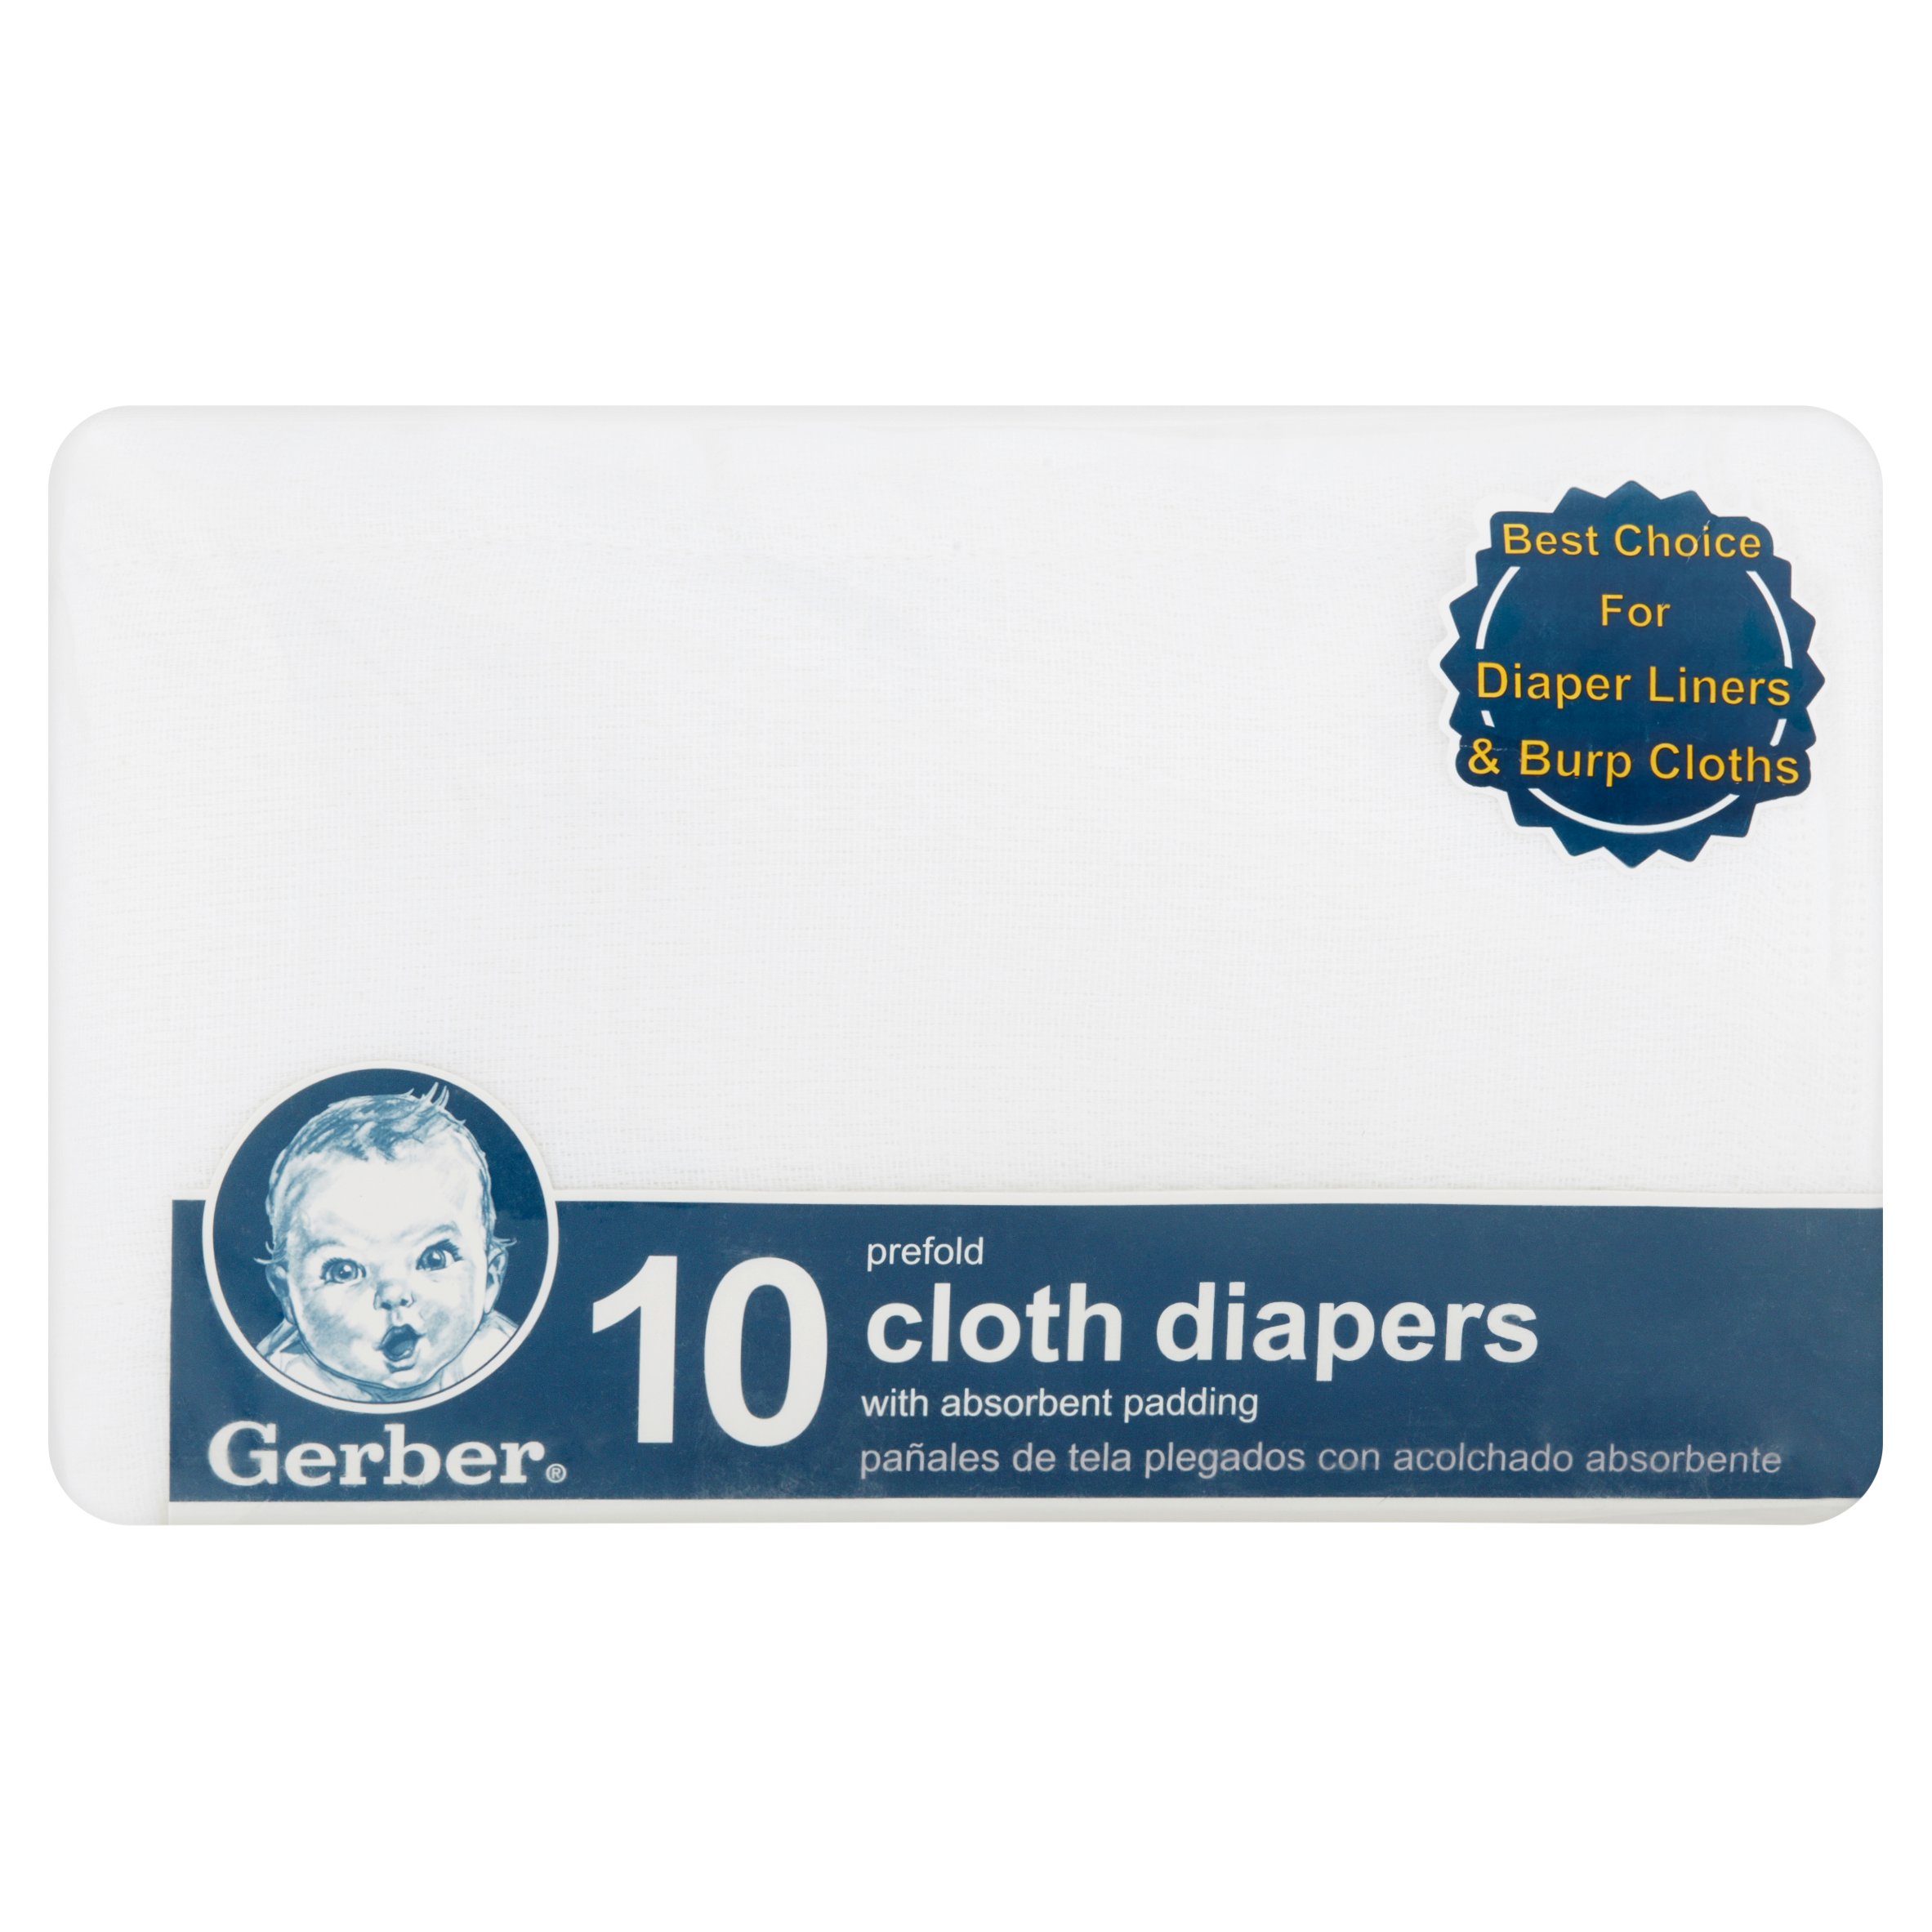 Gerber 100% Cotton Prefold Cloth Baby Diaper, White 10 Pack - image 4 of 8